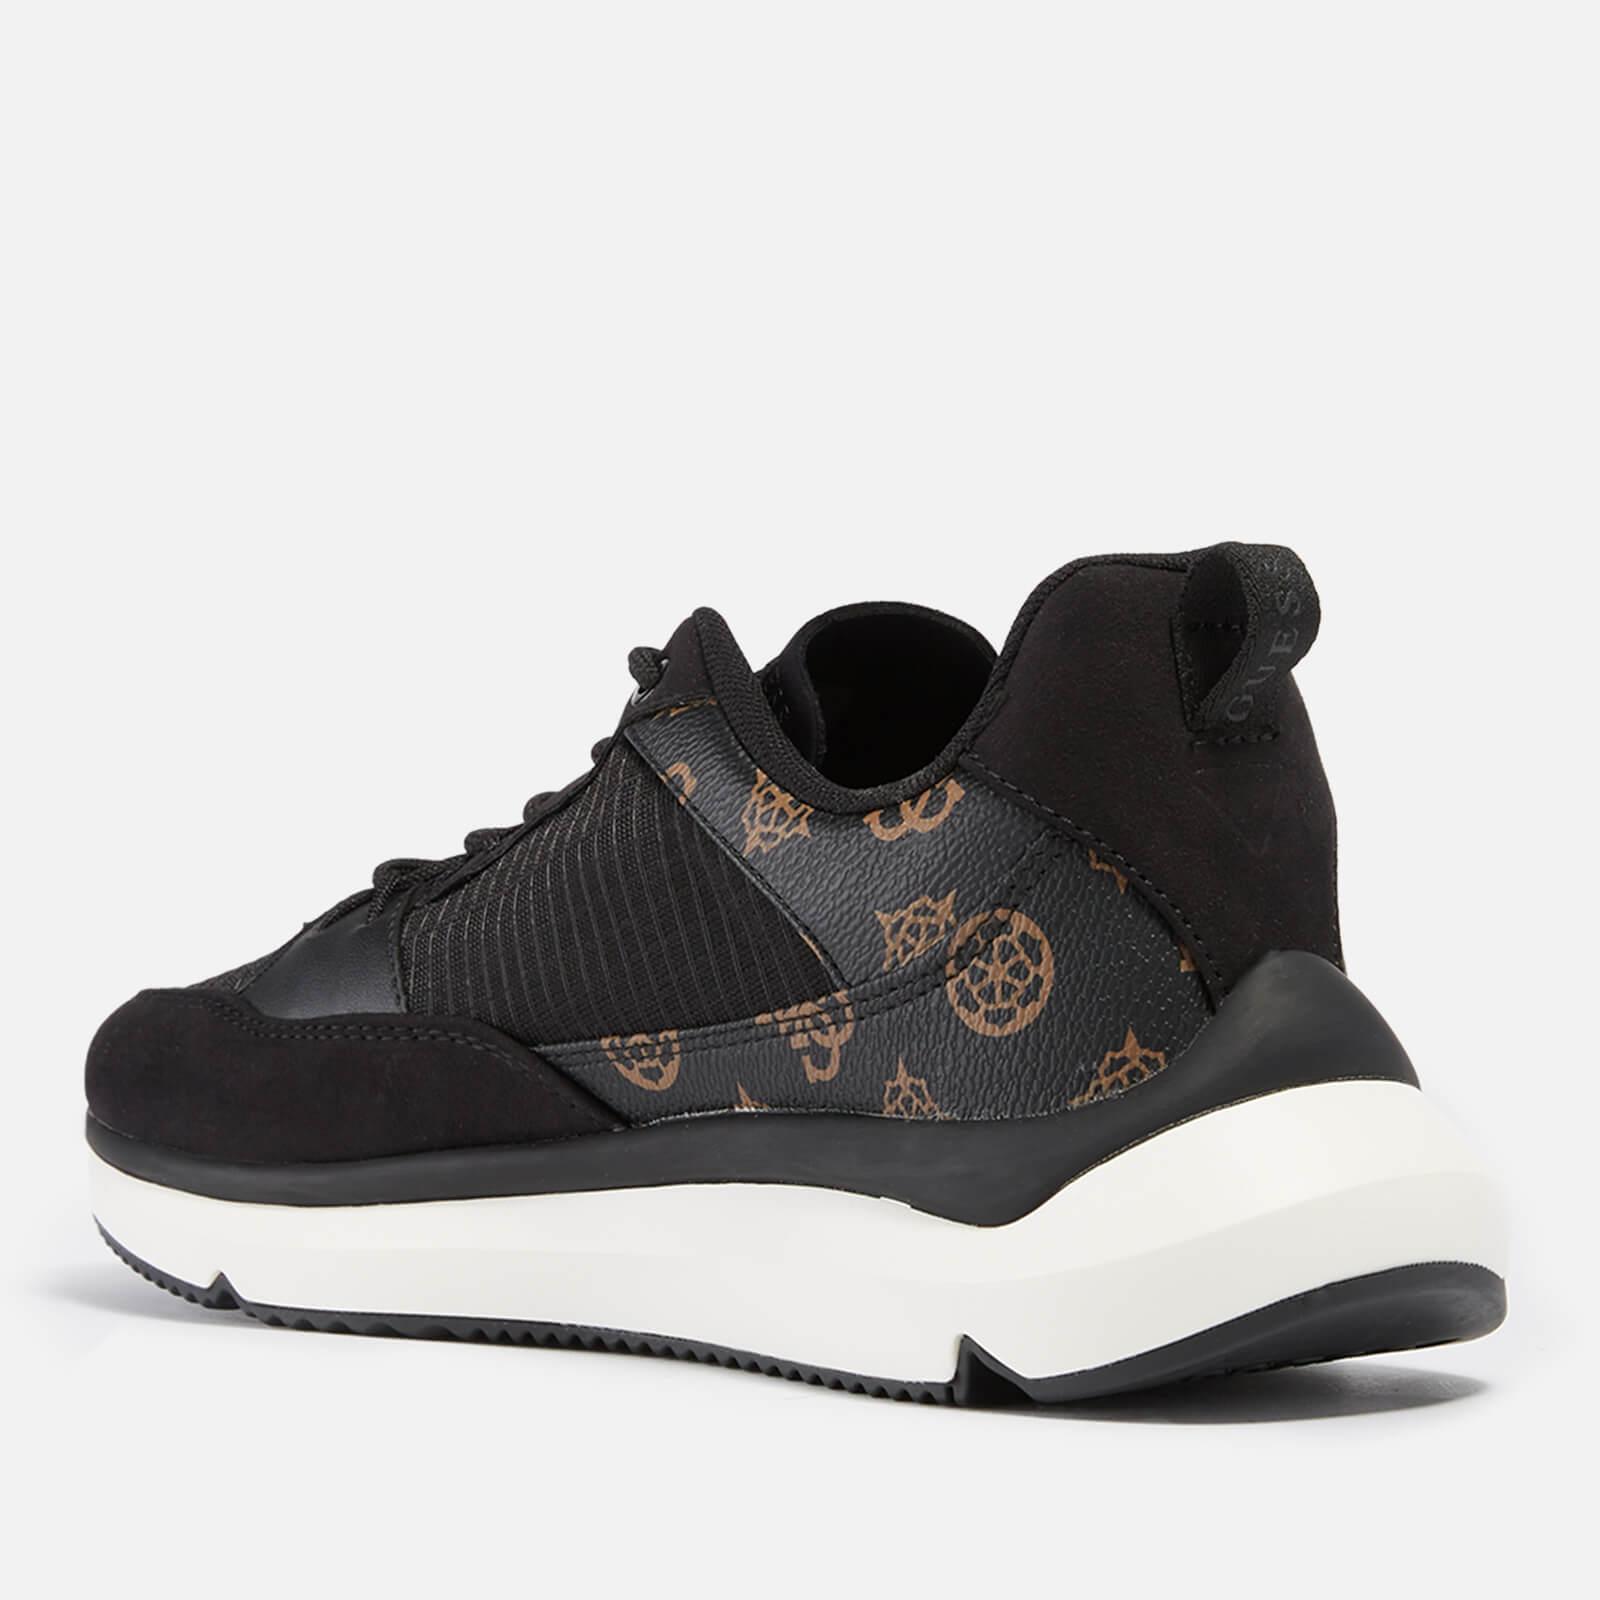 Guess Degrom Running Trainers in Black | Lyst